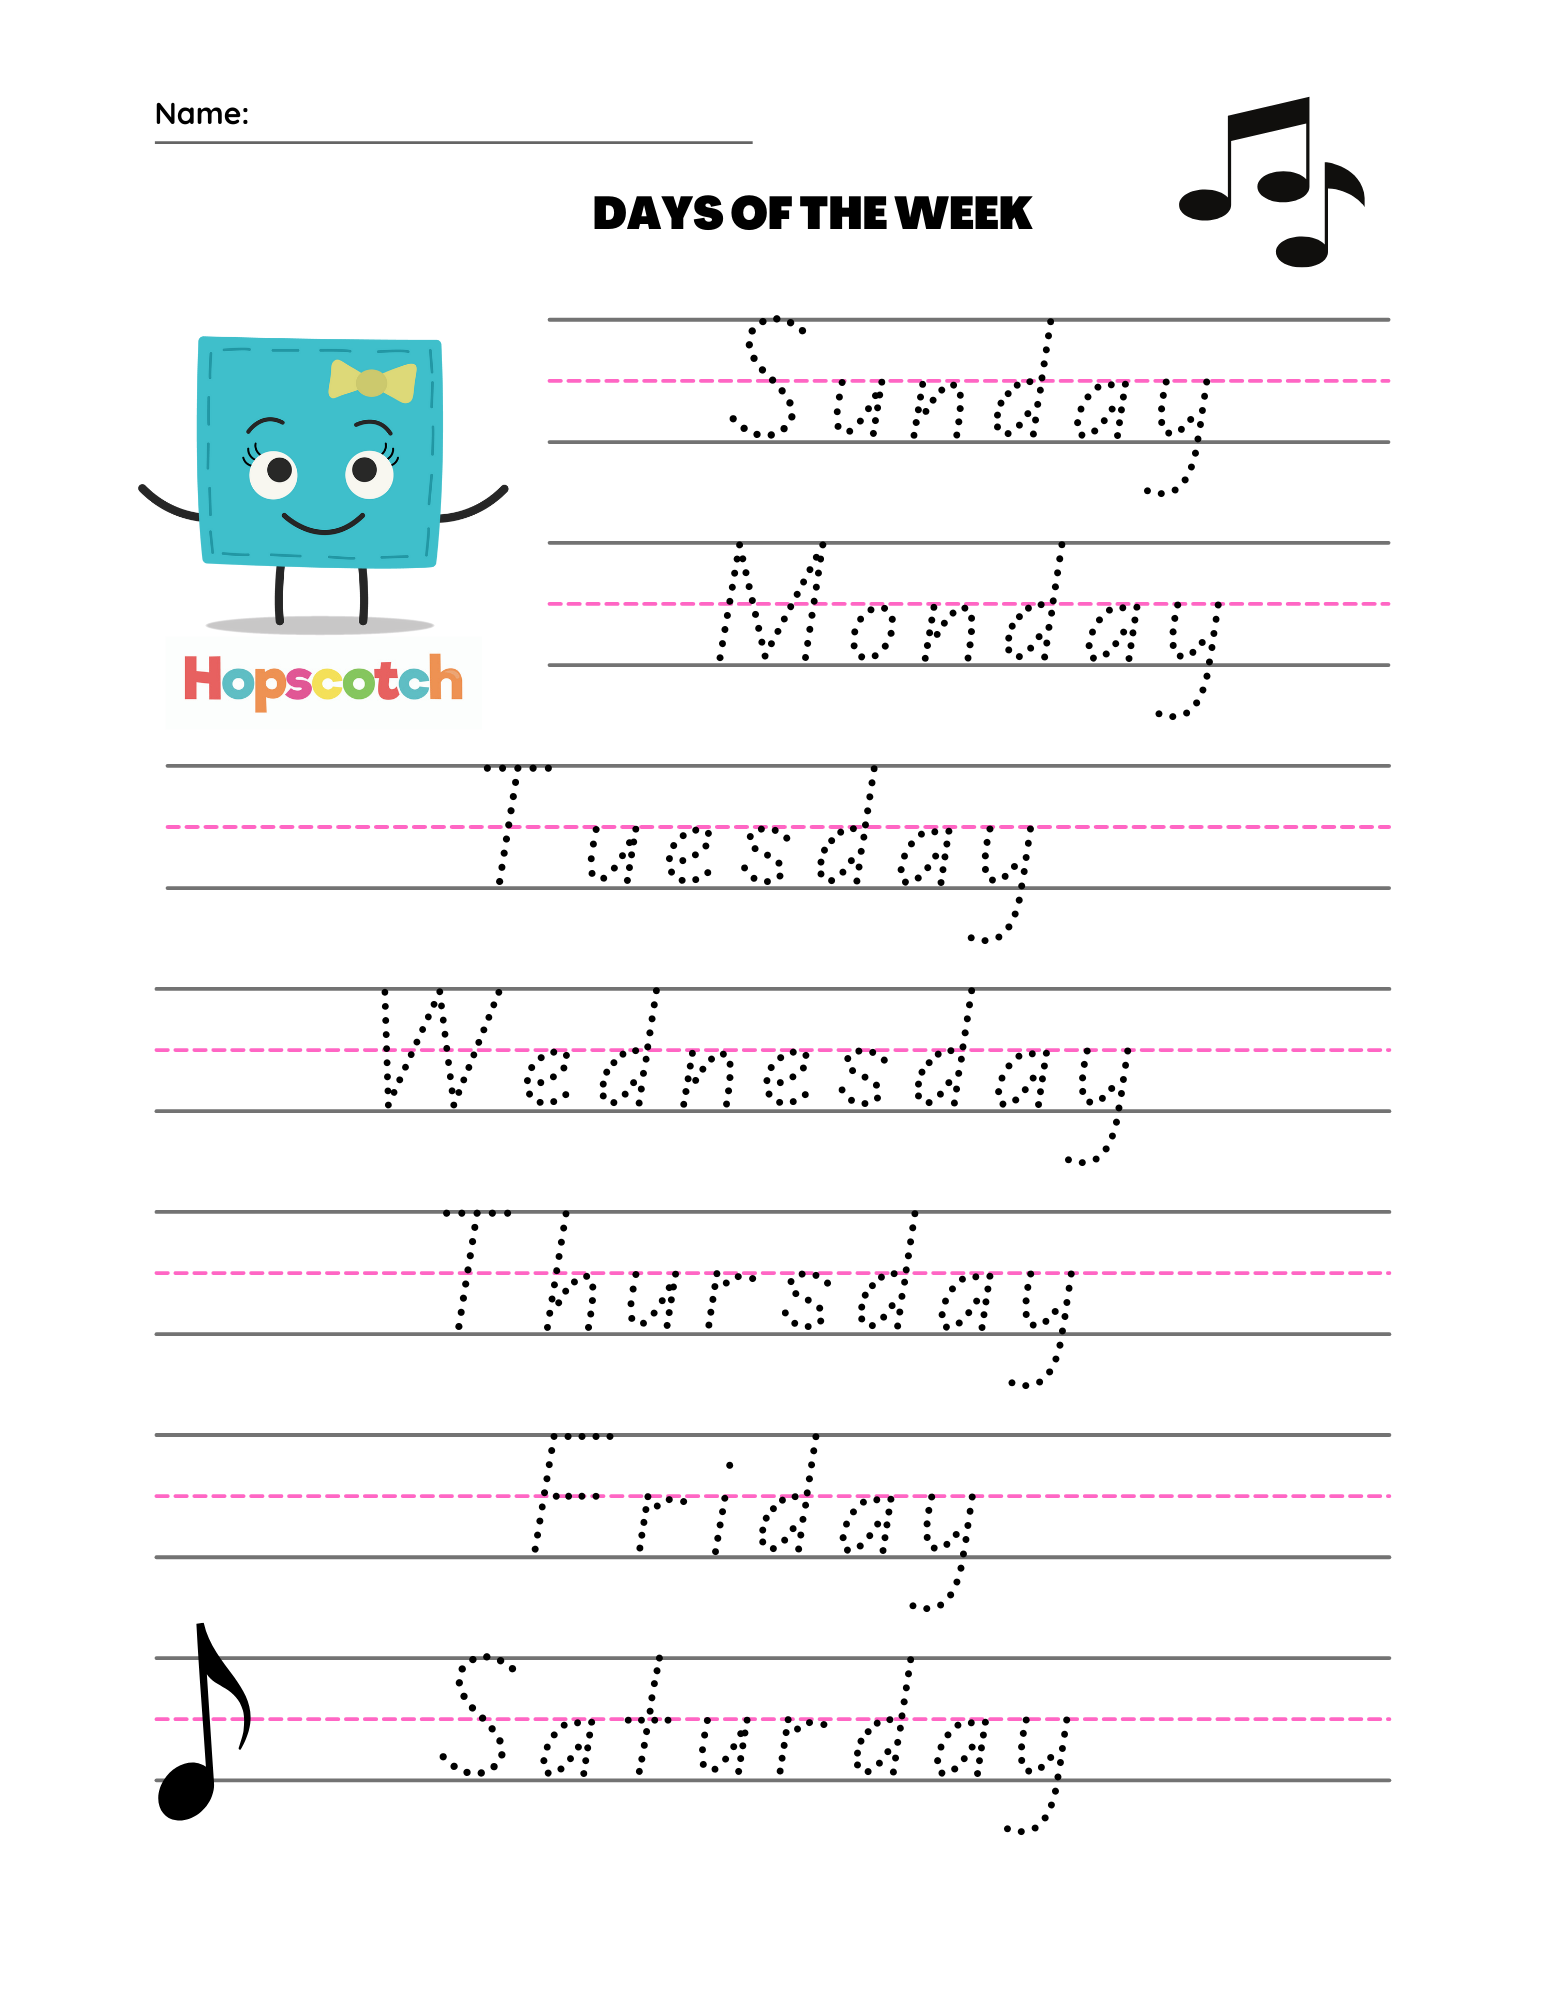 Days of the Week Handwriting.png